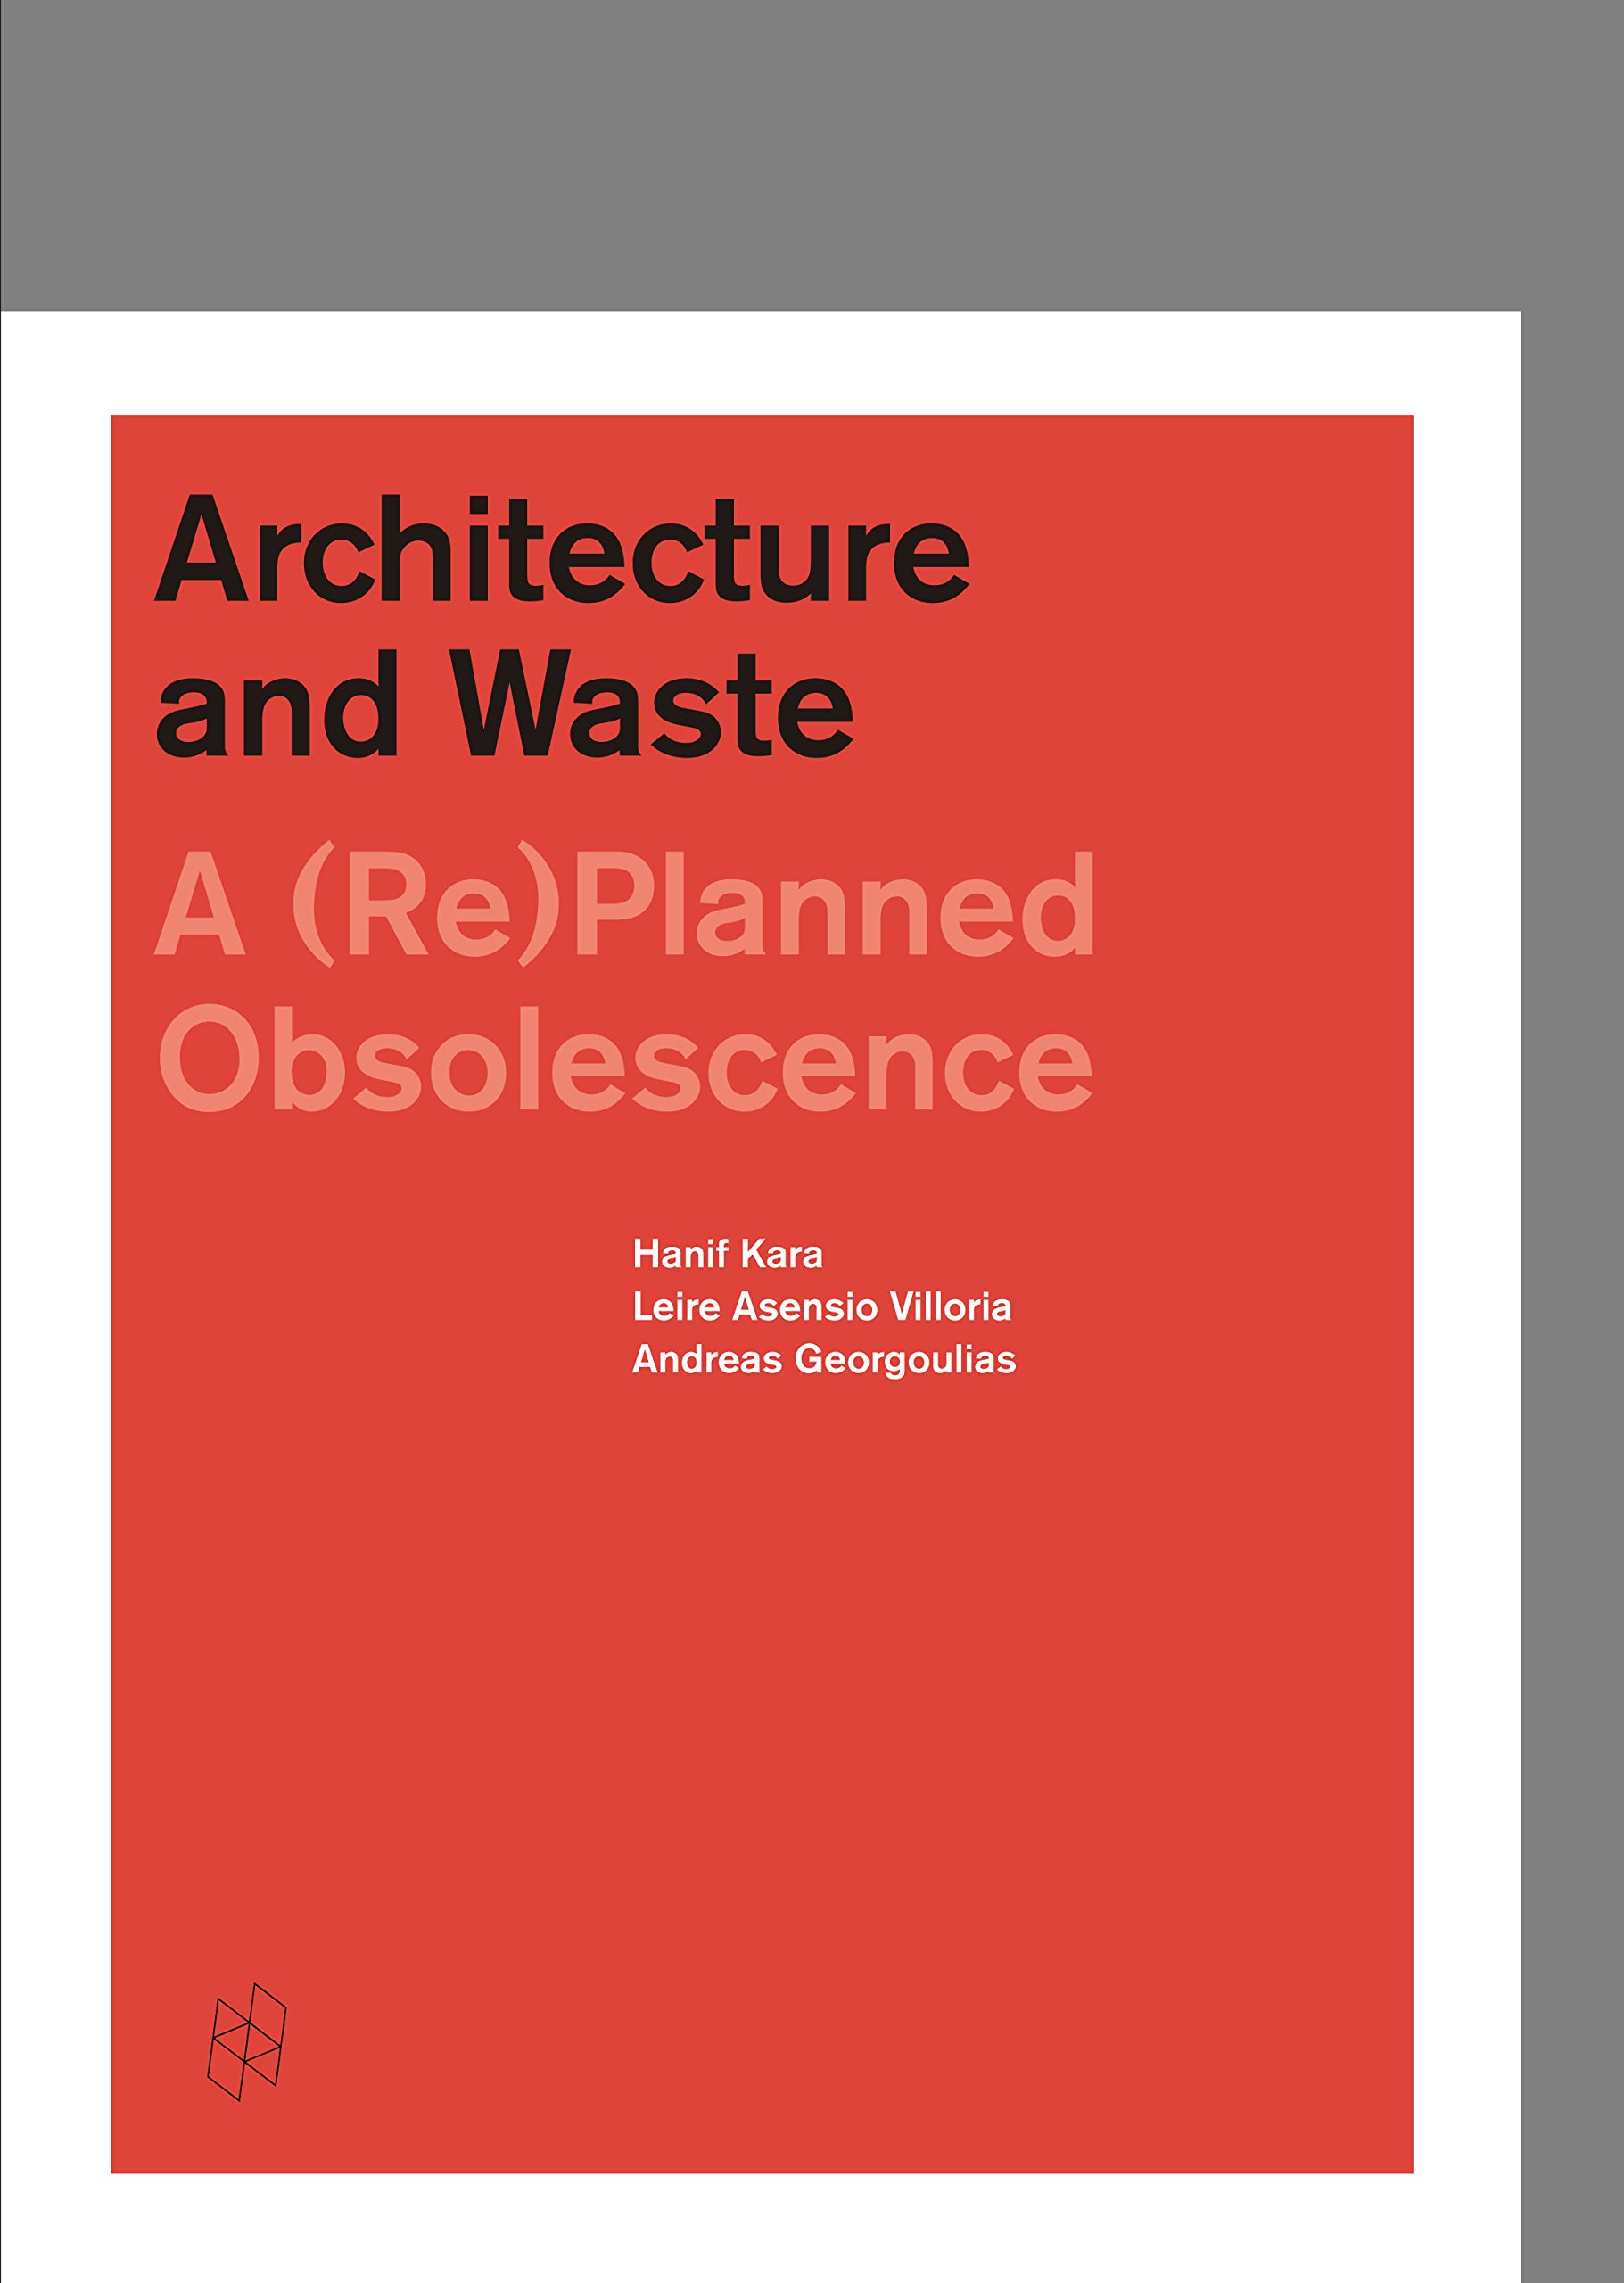 Architecture and Waste. A (Re)Planned Obsolescence | Hanif Kara